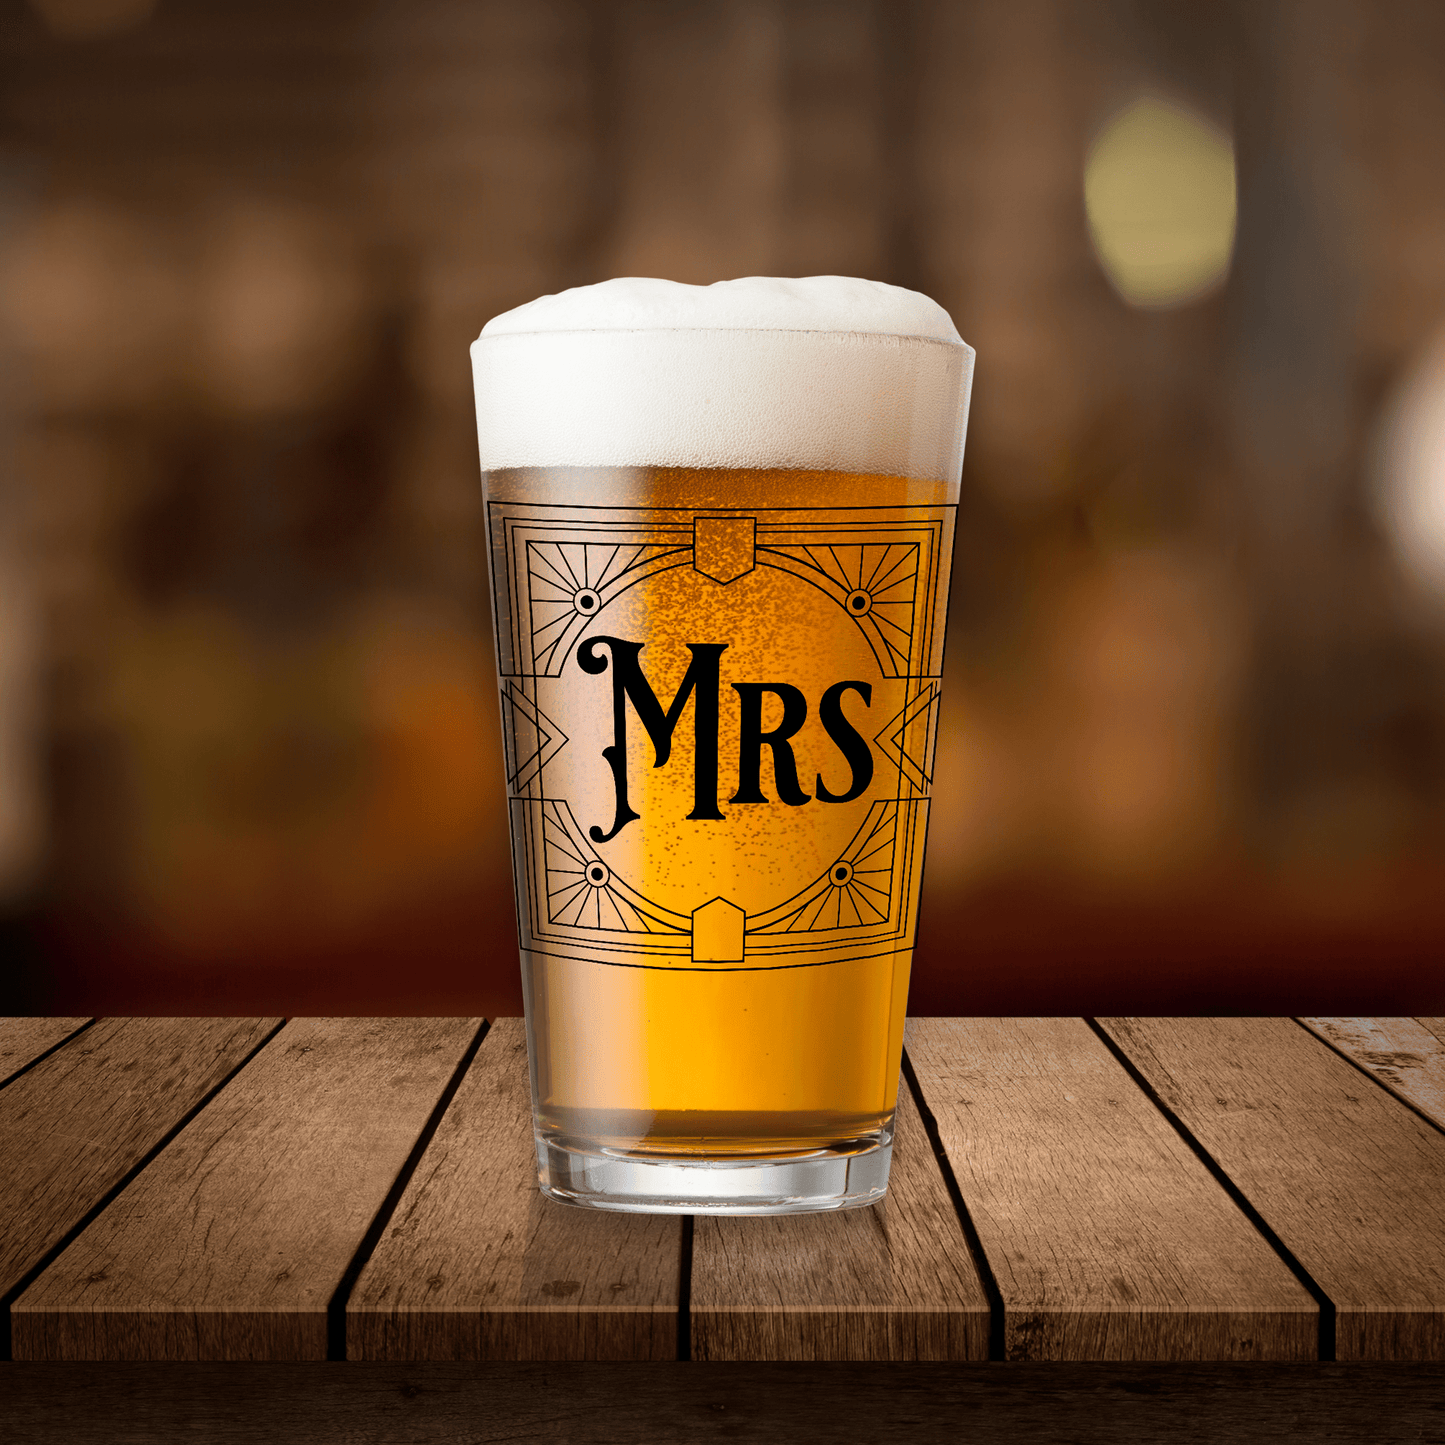 Mrs Personalized 16oz Classic Pint Glass Collection for Wedding Party Favors and Gifts - Expressive DeZien 